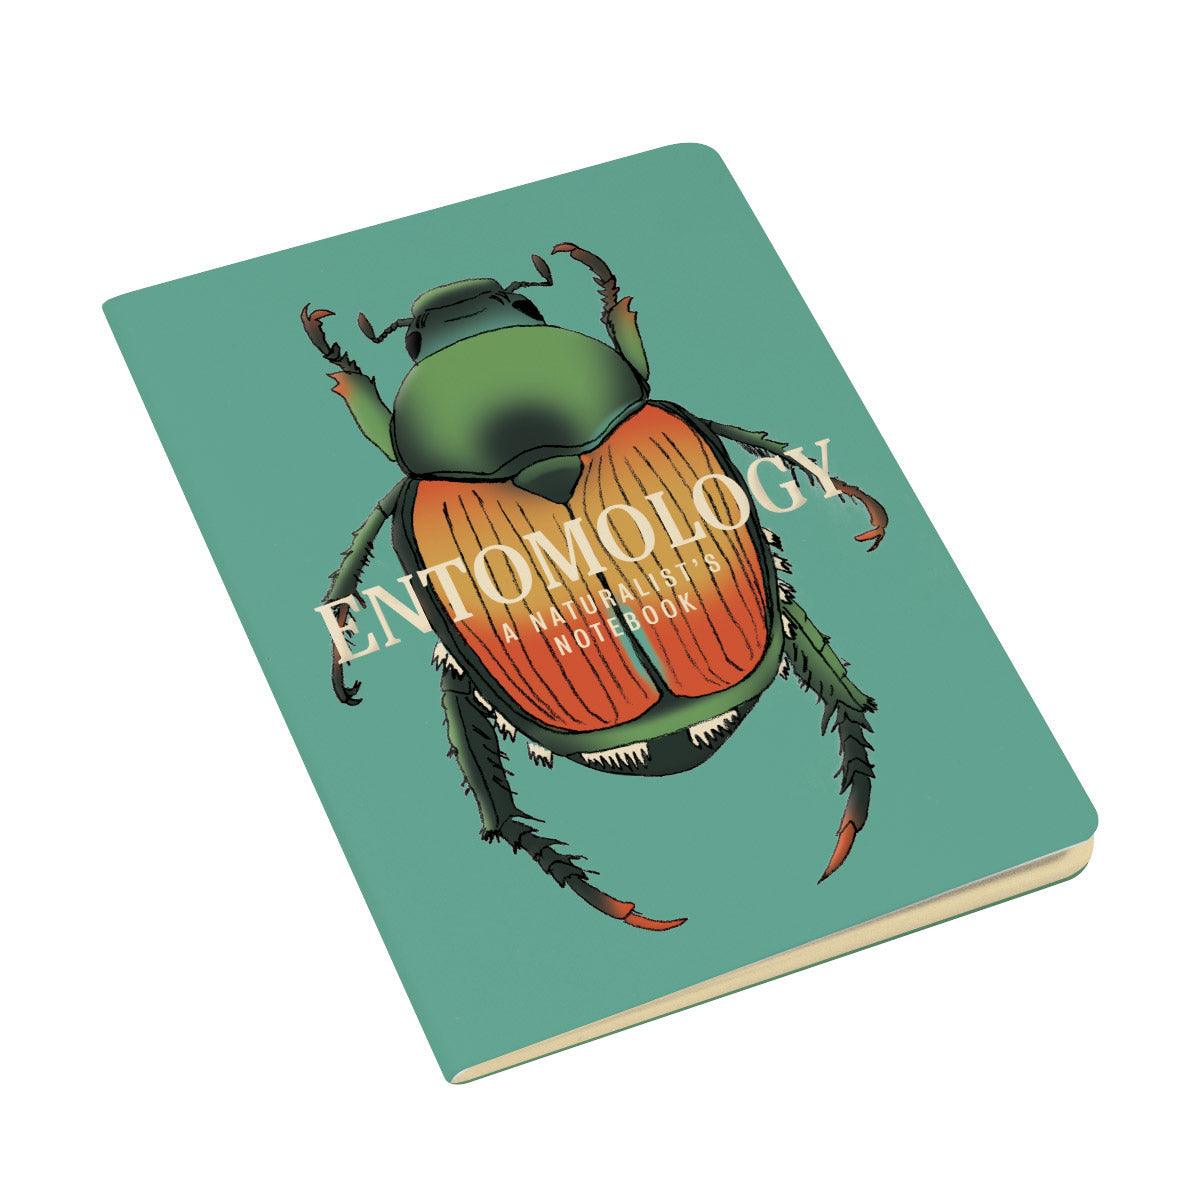 Product photo of Insect (Entomology) Notebook, a novelty gift manufactured by The Unemployed Philosophers Guild.